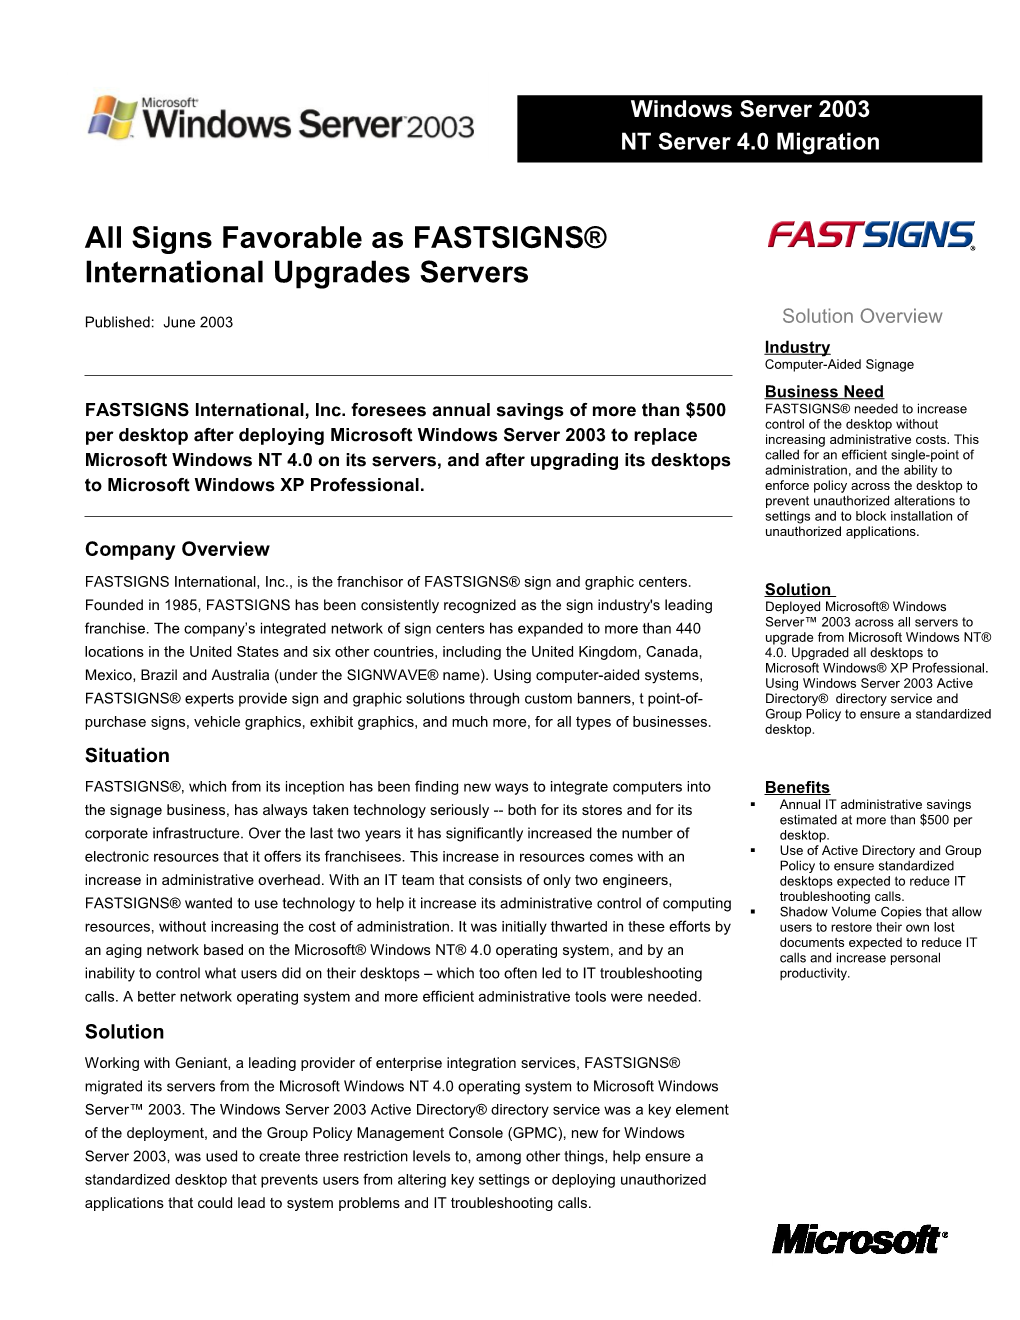 All Signs Favorable As FASTSIGNS International Upgrades Servers